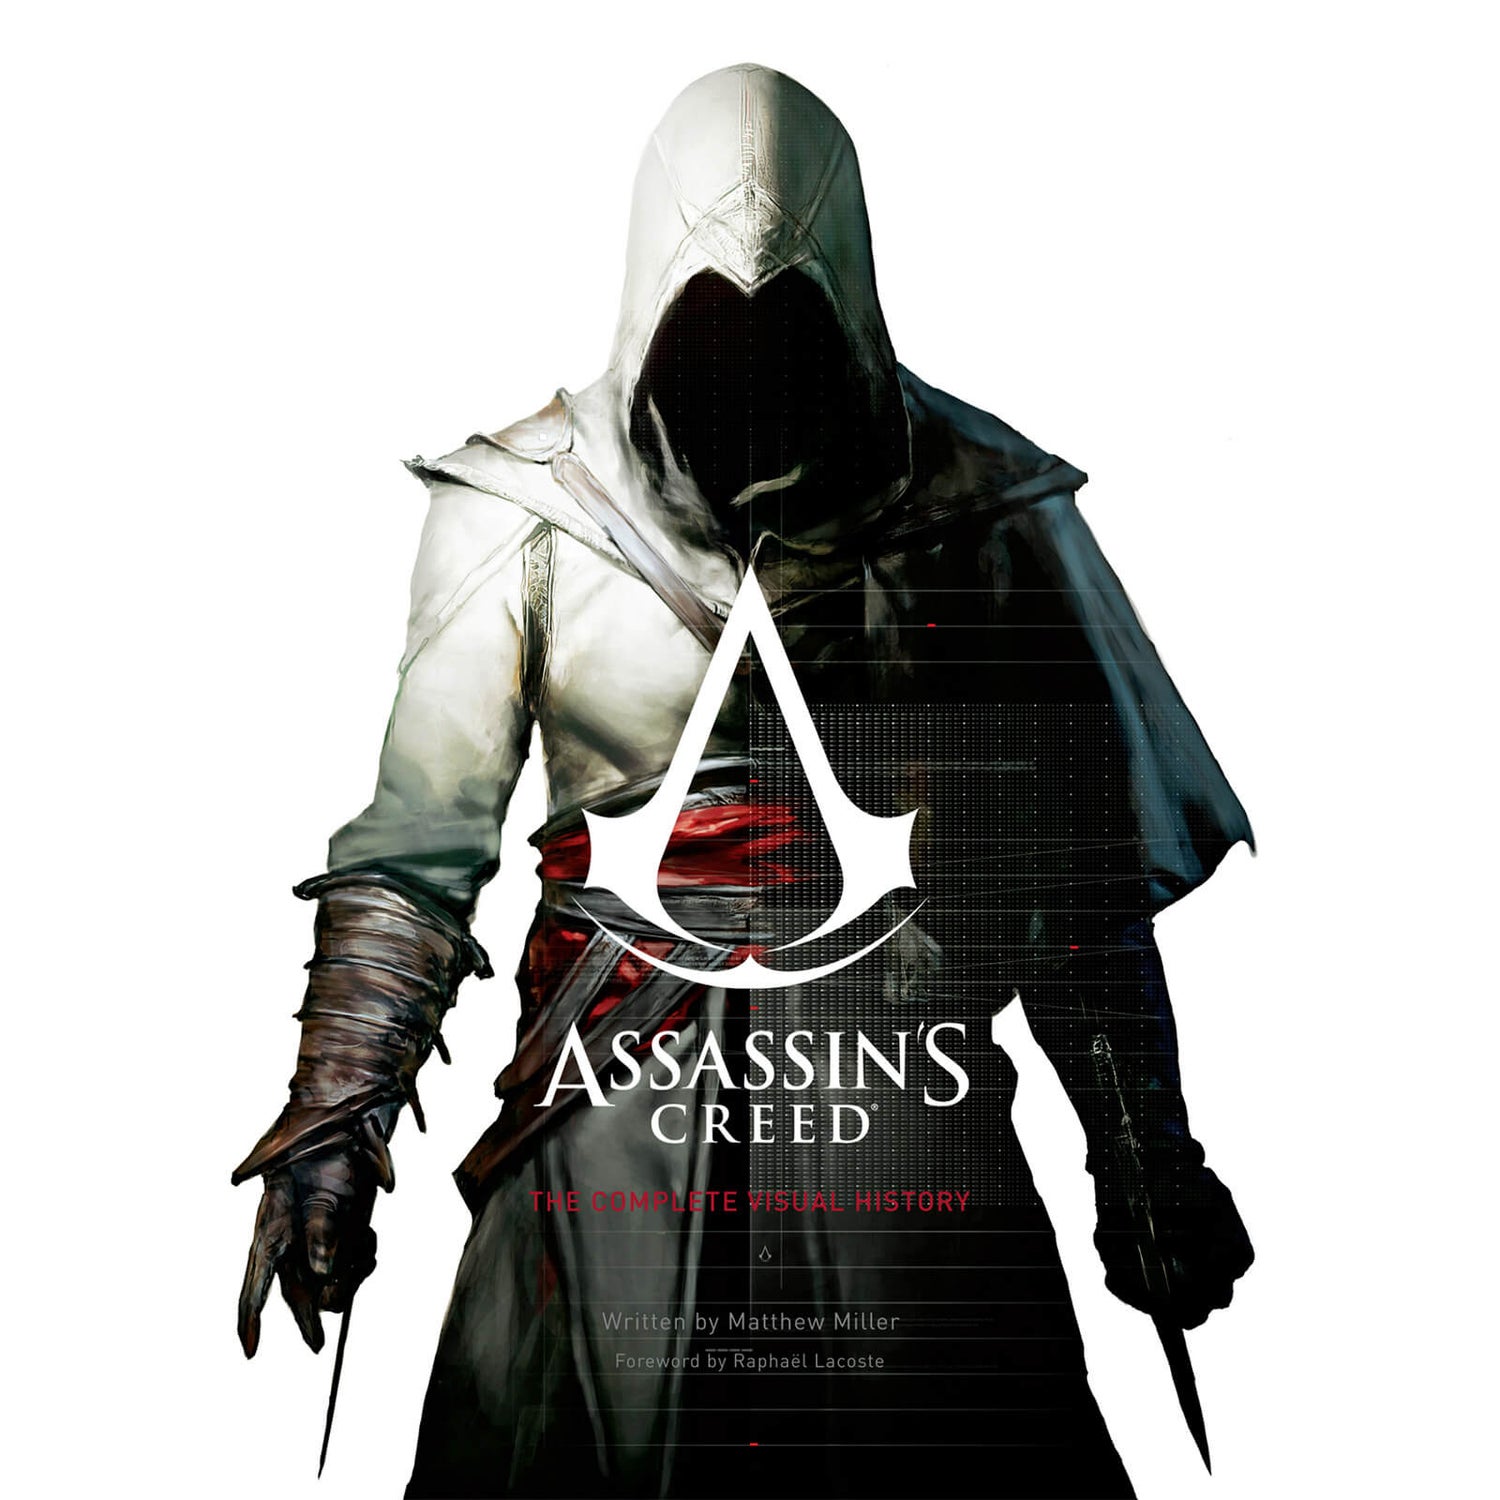 Assassin’s Creed - The Complete Visual History